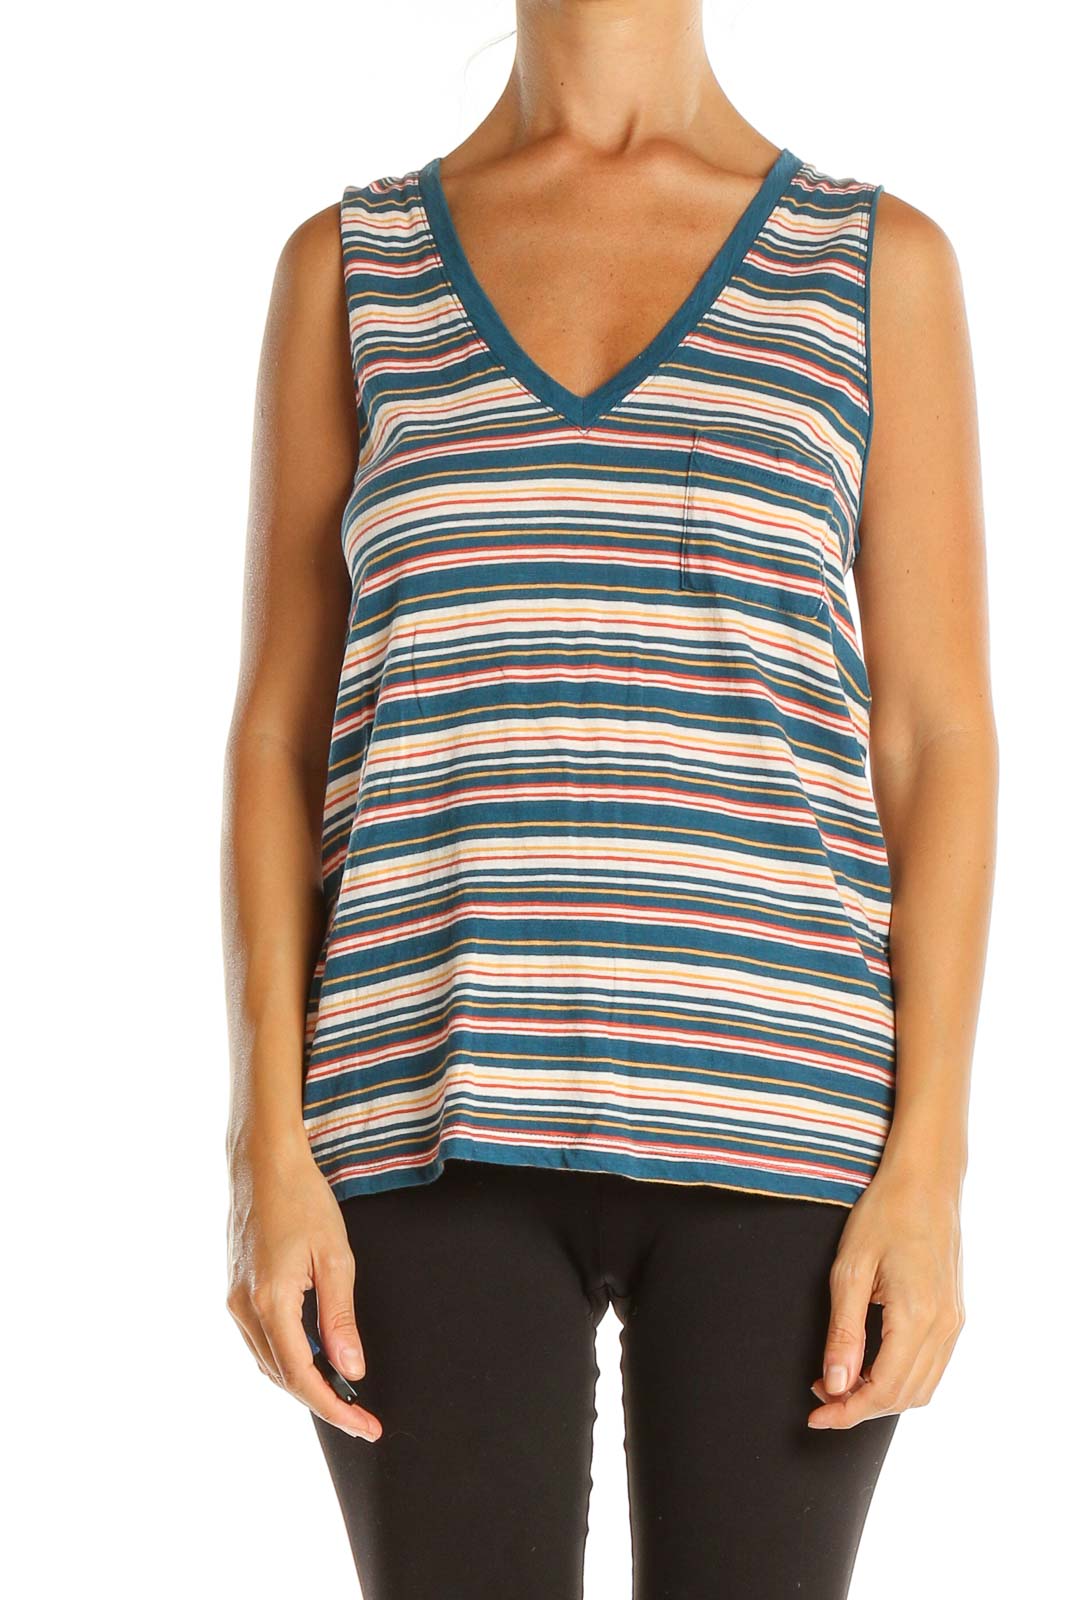 Blue Striped Casual Tank Top Front